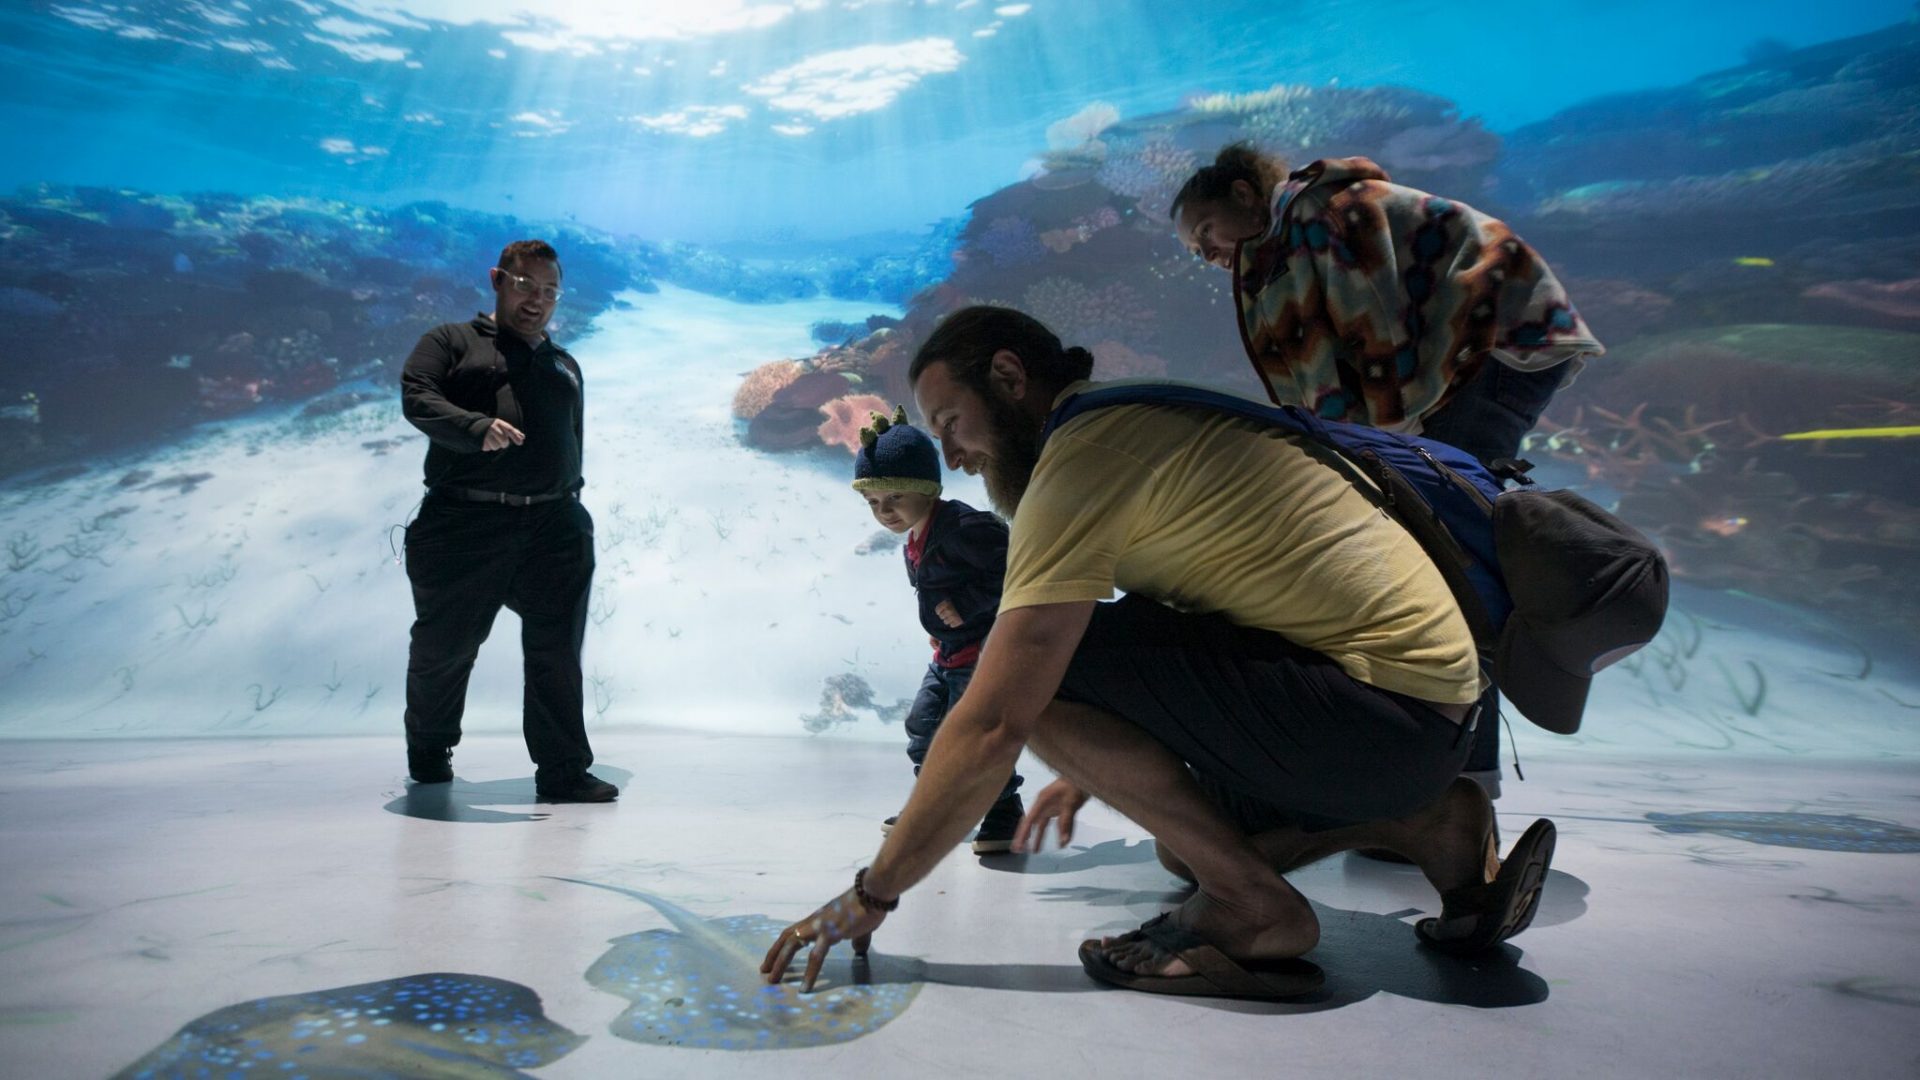 Shallows interactive space at the experiential retail location for National Geographic Encounter: Ocean Odyssey